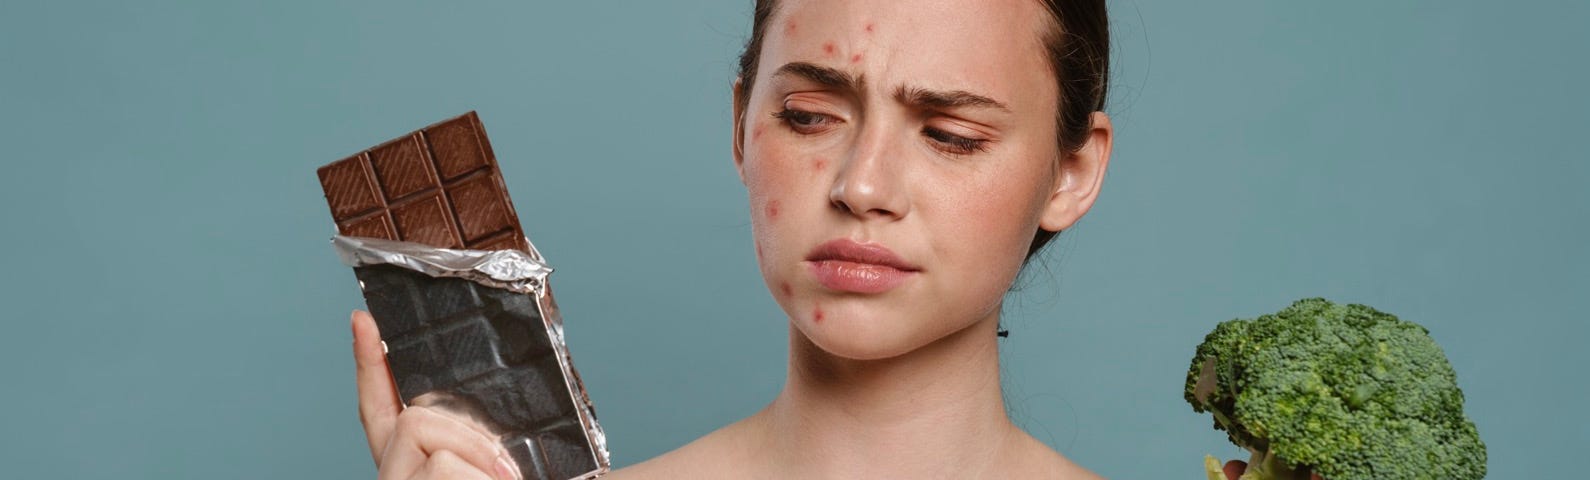 Young woman with acne holding a block of chocolate and broccoli